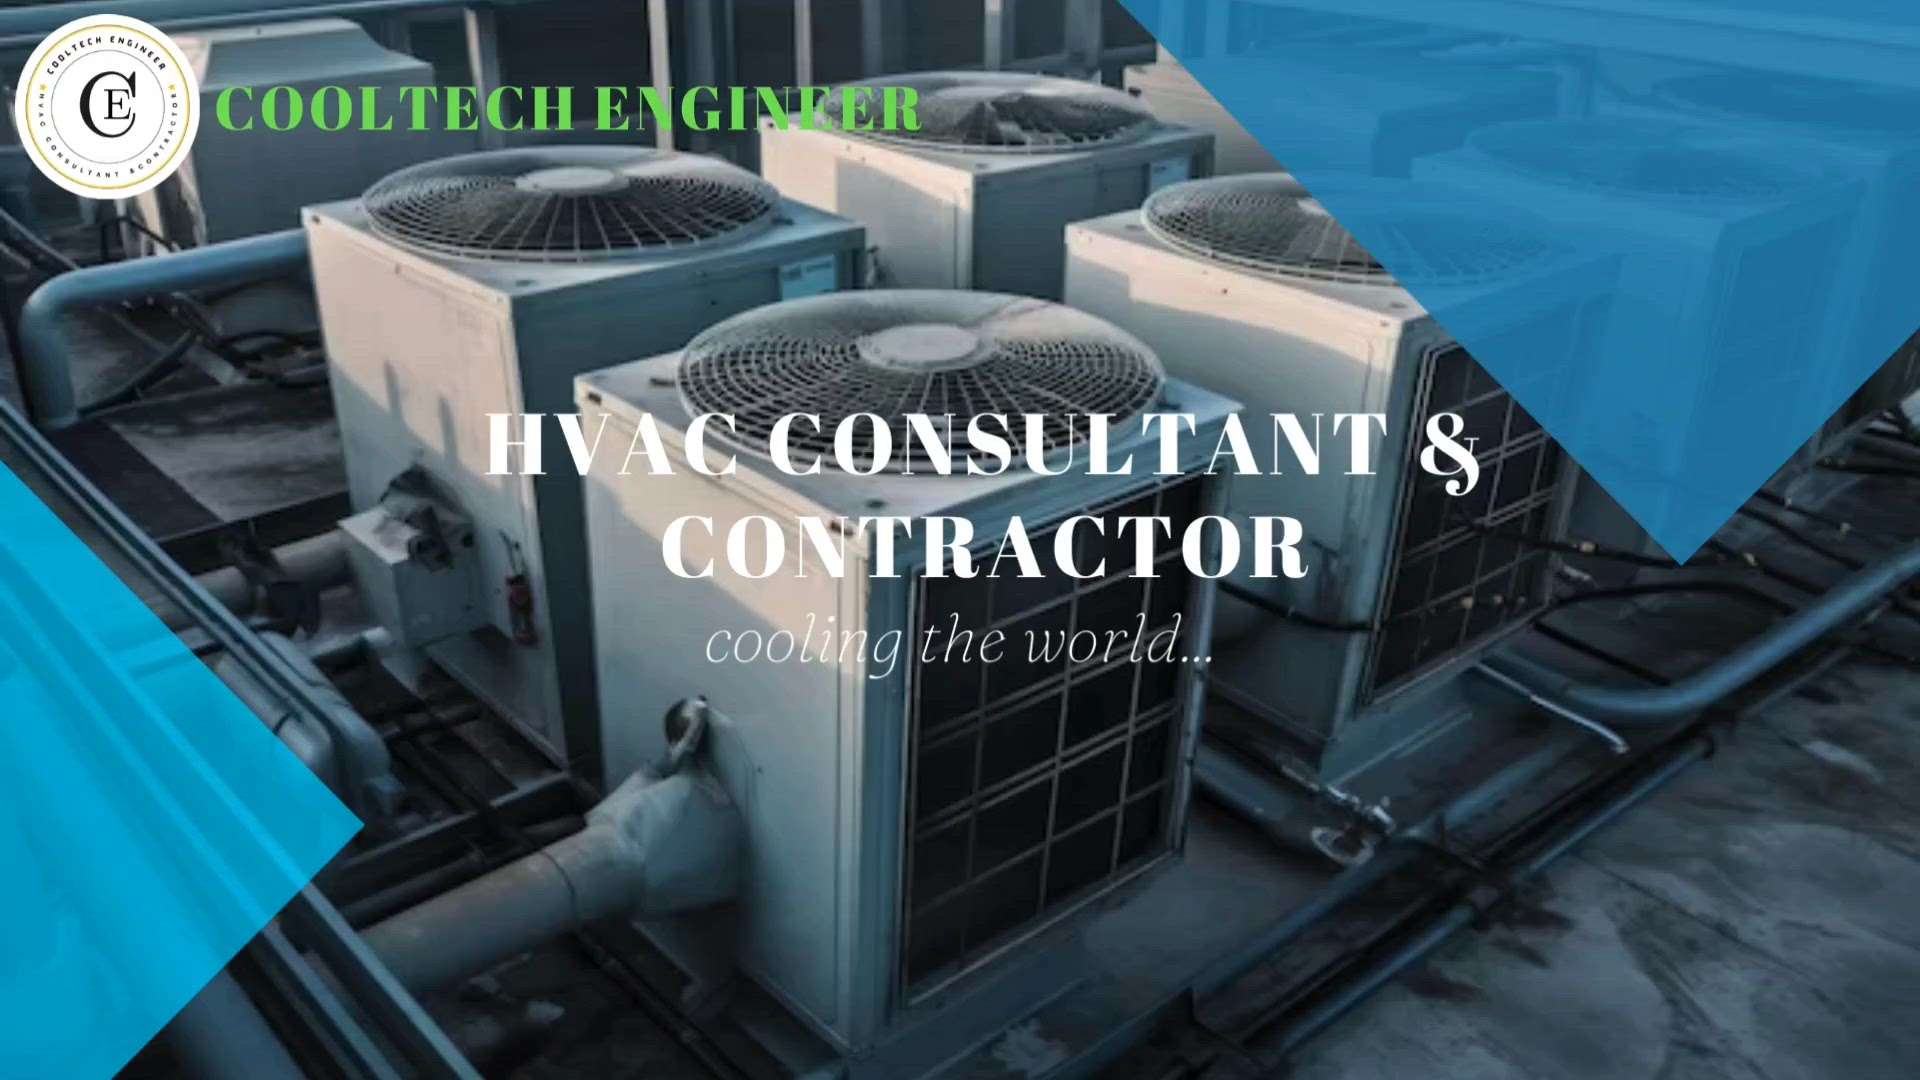 Looking for the best commercial, industrial, and residential HVAC systems? Look no further than us! Our team of experts has years of experience in designing, installing, and maintaining top-quality HVAC systems for all types of buildings. From small homes to large factories, we have the expertise to meet all your HVAC needs. We take pride in providing reliable, energy-efficient, and cost-effective solutions that exceed your expectations. So if you want to ensure optimal comfort, air quality, and temperature control for your property, choose us as your HVAC partner. Contact us today for a consultation!  #architecture  # interior  #hvacproject  #